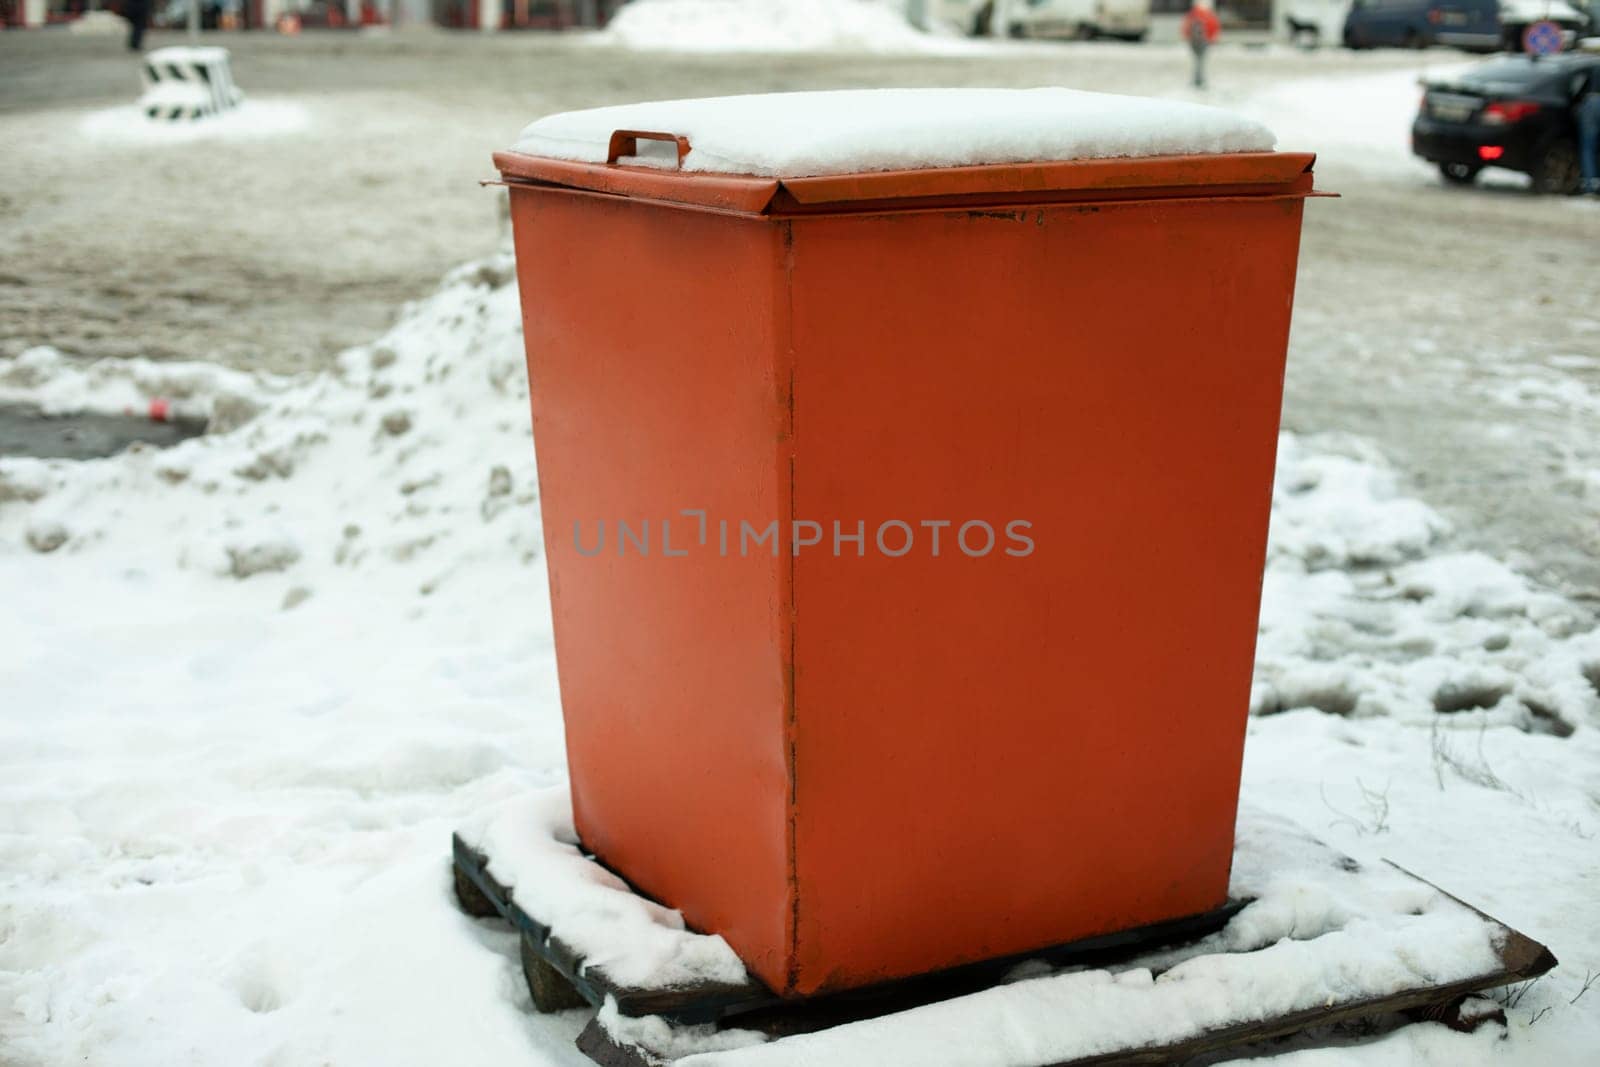 Steel tank. Dumpster. Place to store sand on highway. Orange object in winter on road. Details of road infrastructure.